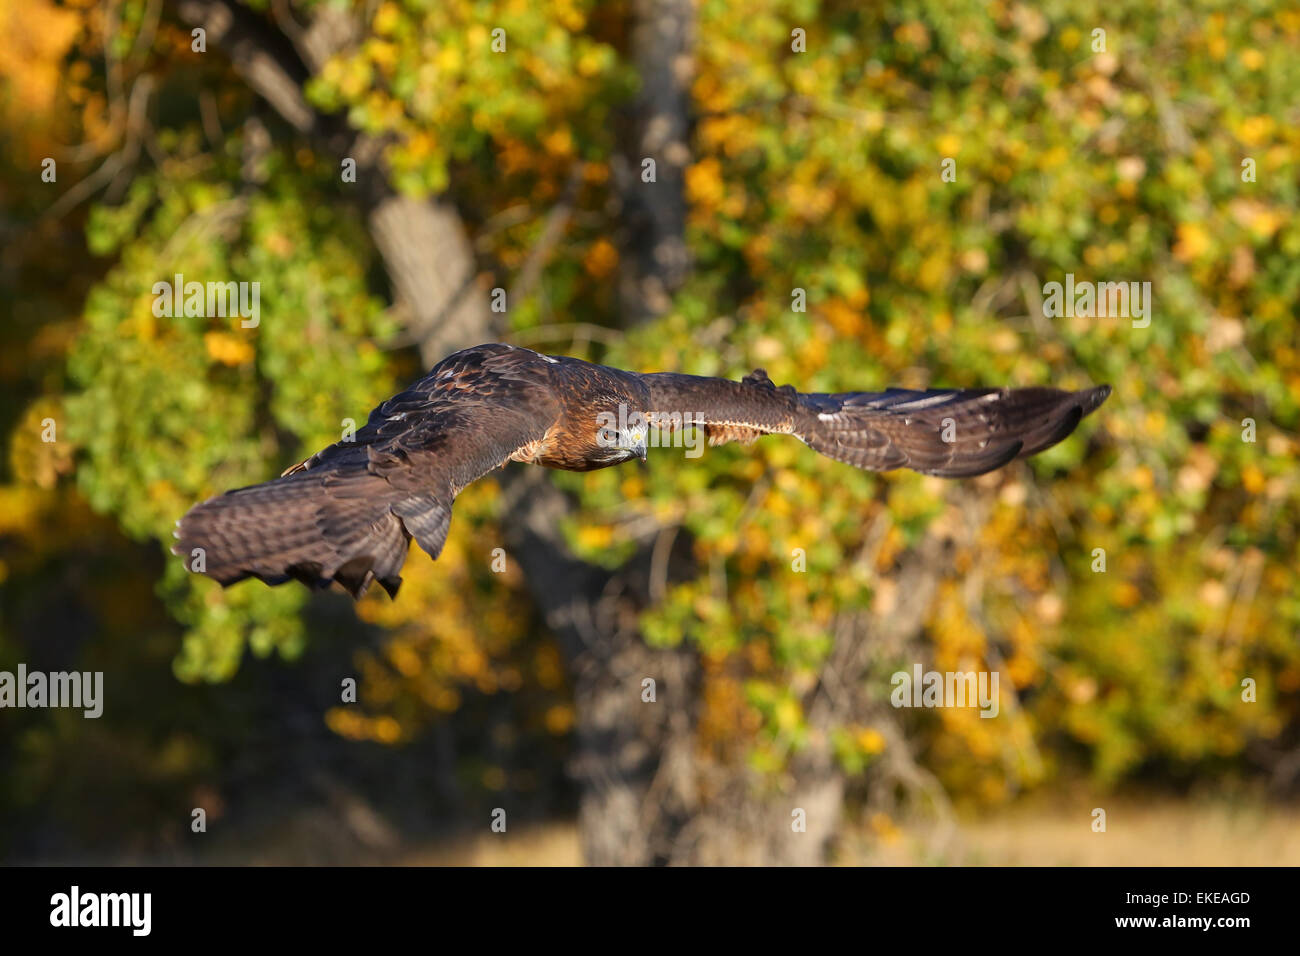 Red-tailed hawk (Buteo jamaicensis) in flight Stock Photo